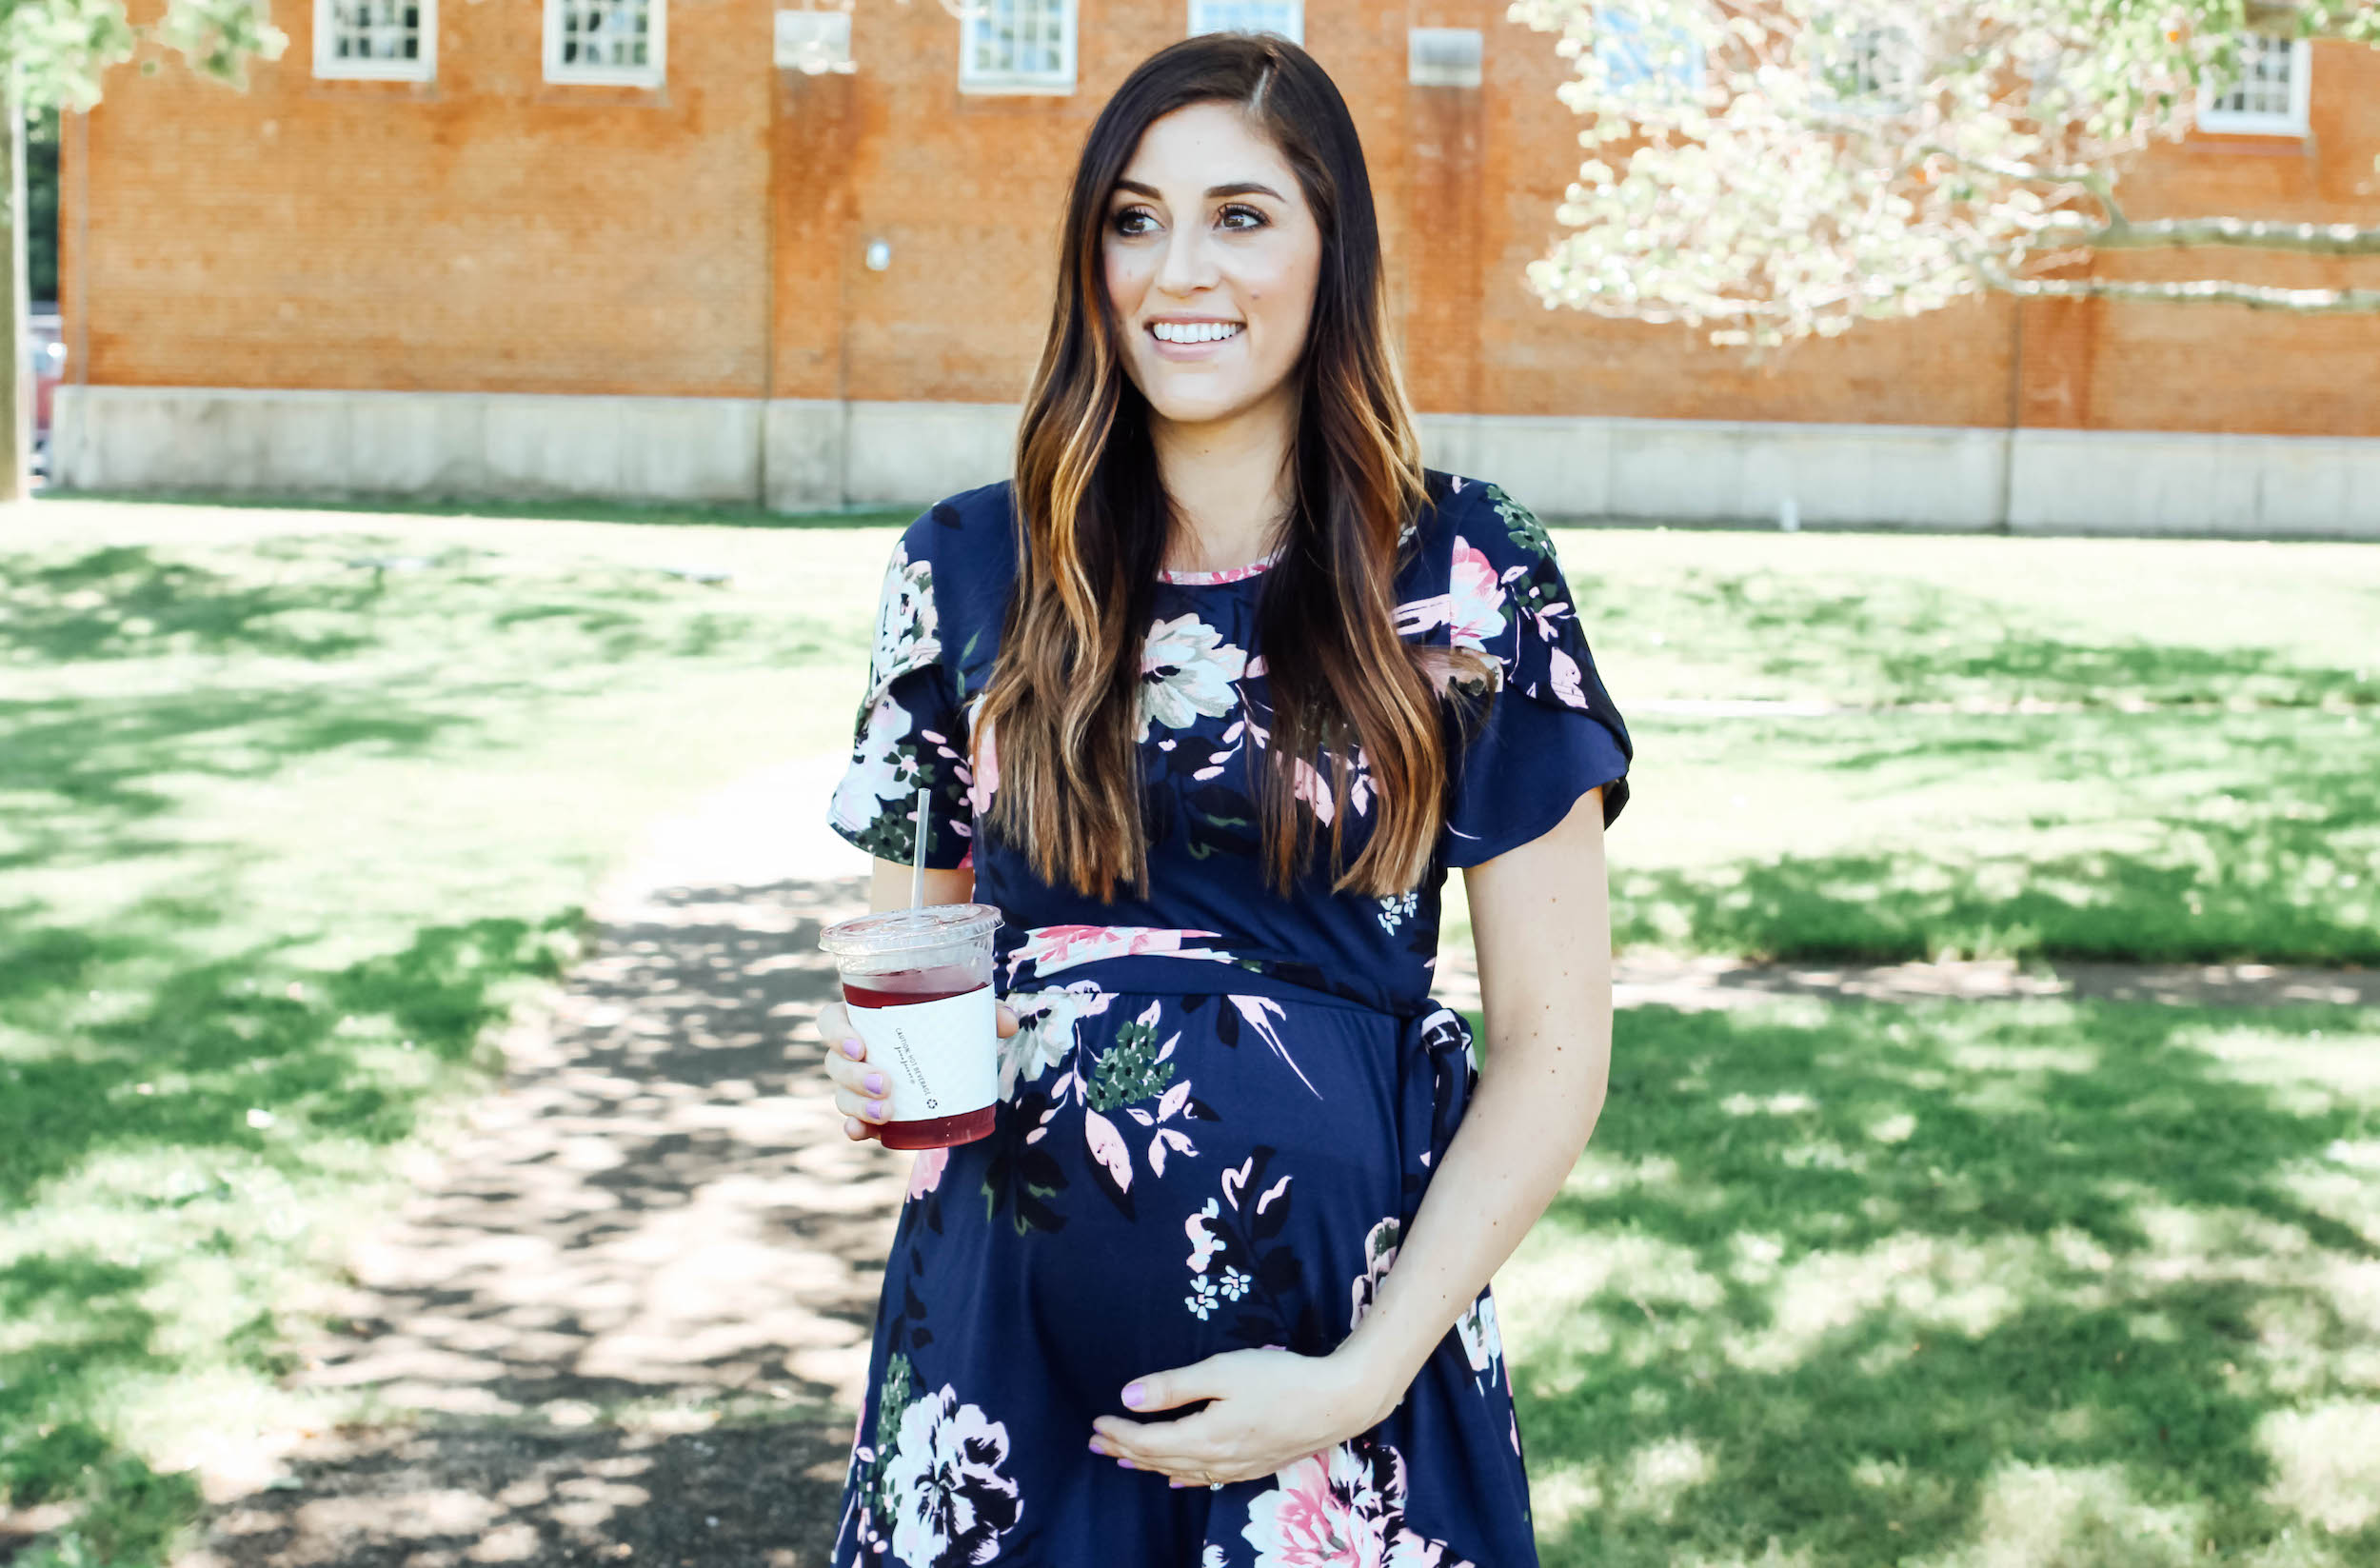 Maternity Style | 5 Things It's Completely OK To Feel During Pregnancy